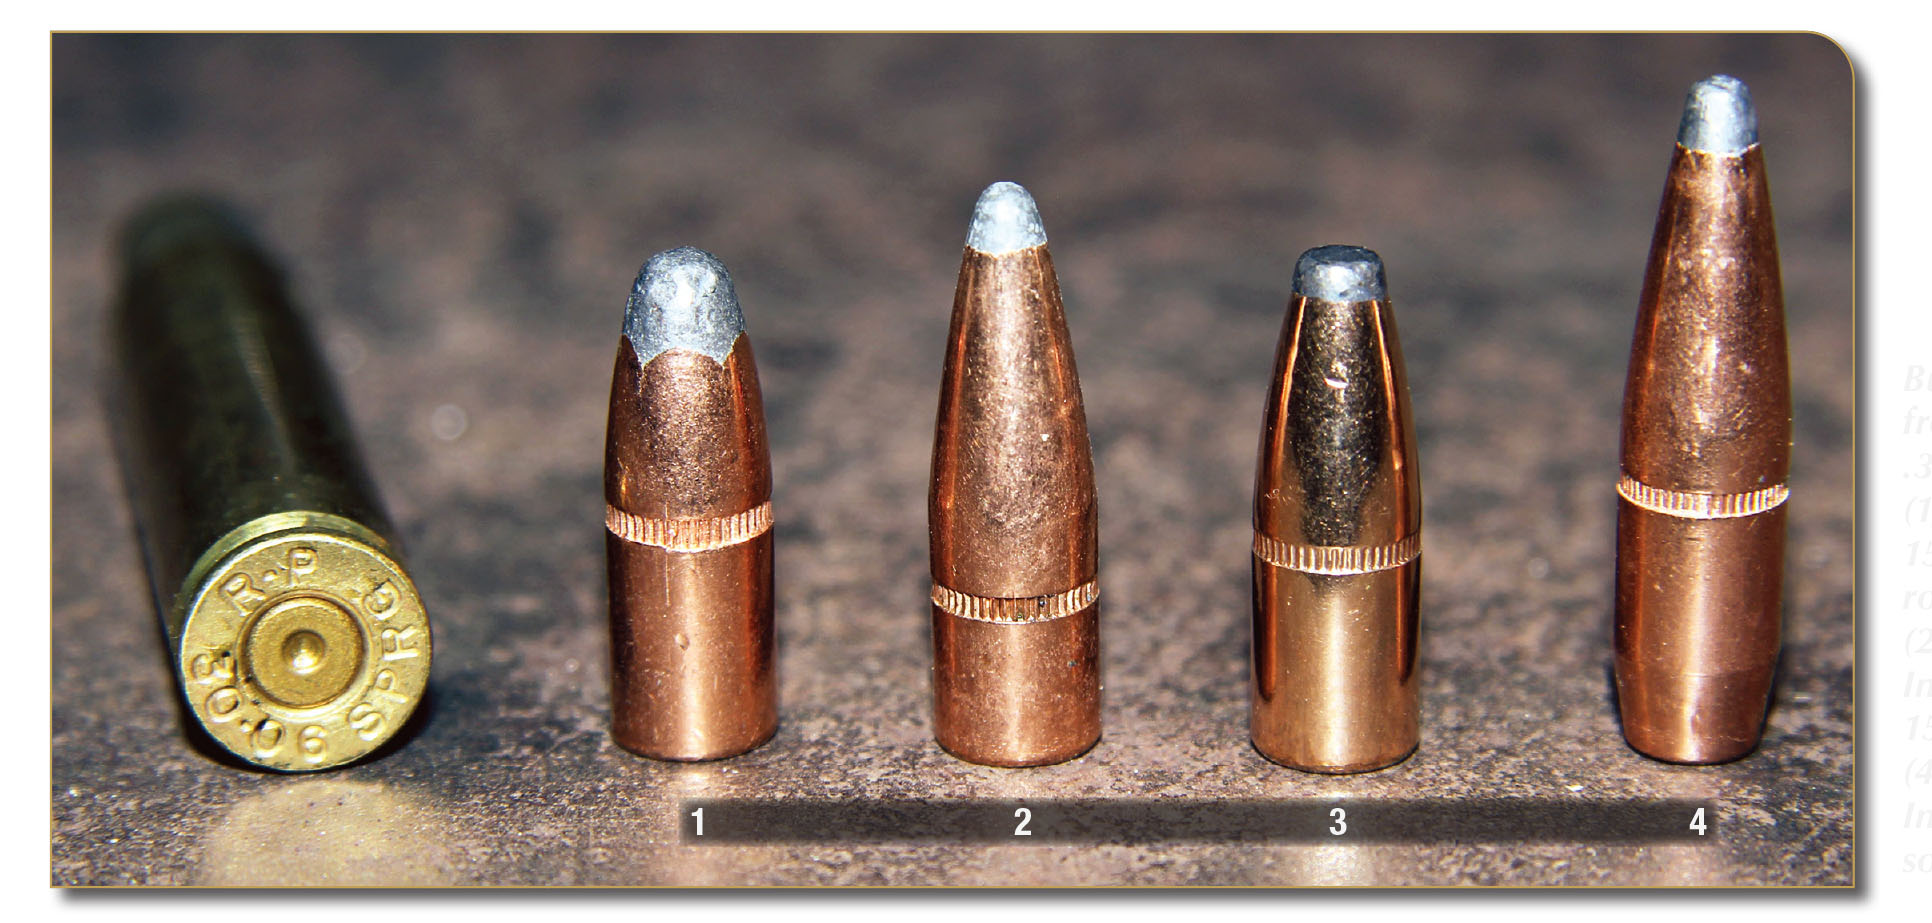 Bullets tested from Patrick’s .30-06 included: (1) Remington 150-grain softpoint roundnose W/C, (2) Hornady 150-grain InterLock, (3) Speer 150-grain Hot-Cor and (4) Hornady 180-grain InterLock boat-tail softpoint.